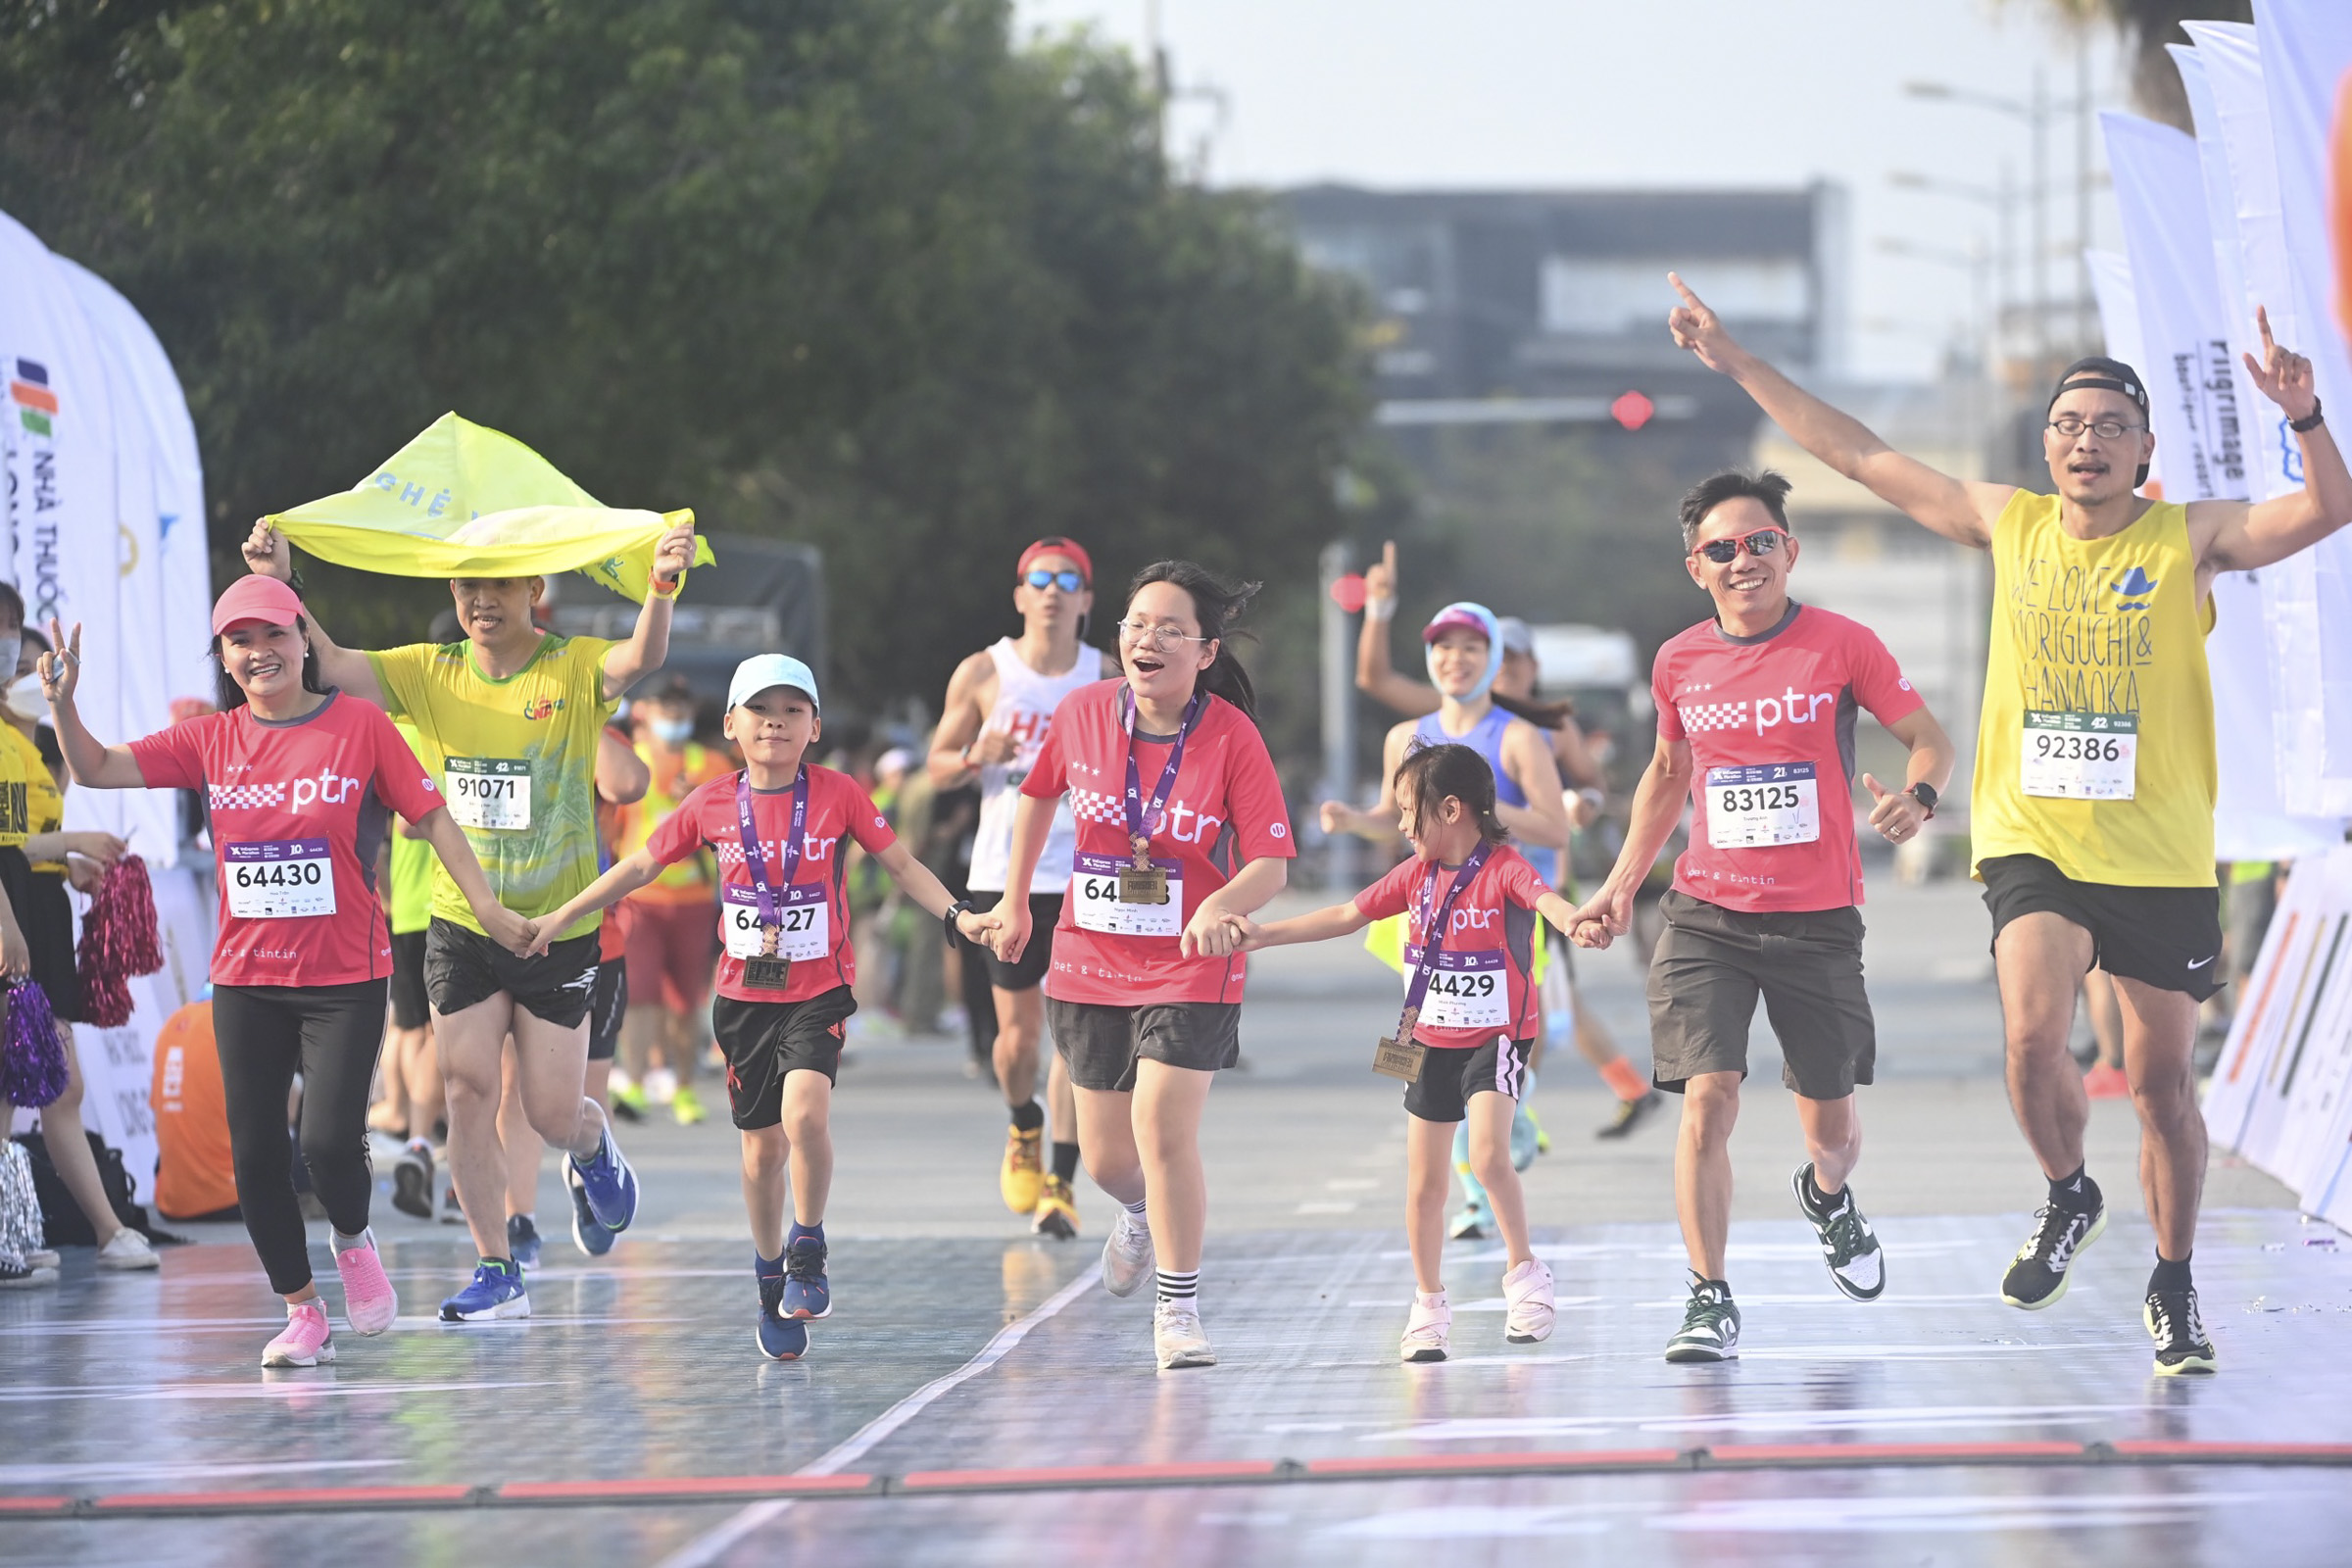 A family of five (in red) crosses the line together after finishing a 10-km run.